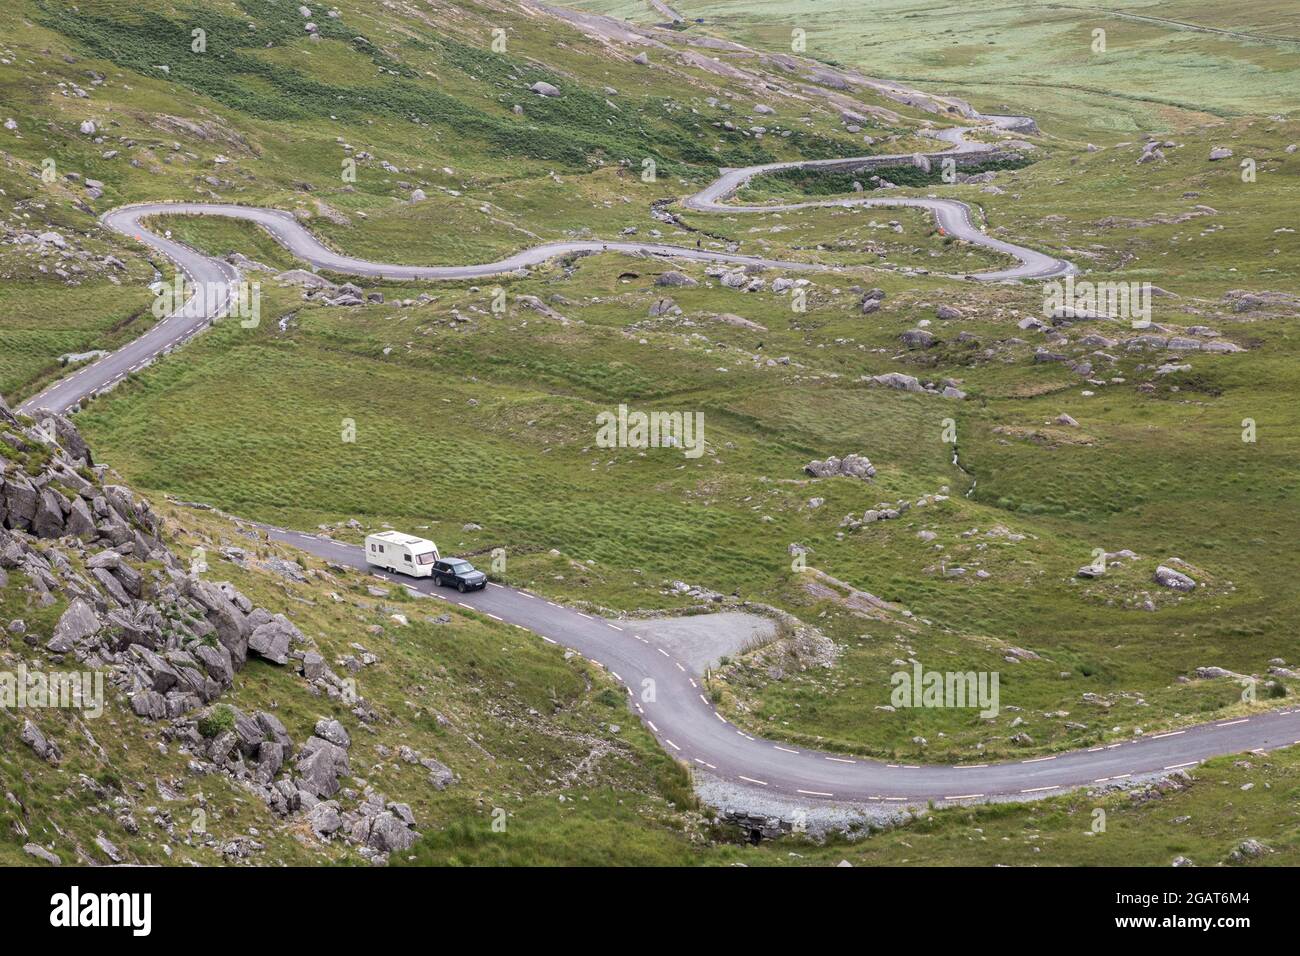 Healy Pass, Cork, Ireland. 31st July, 2021. Holidaymakers climb the steep incline of the serpentine road with their caravan as they head over the Healy Pass in West Cork, Ireland. - Picture; Credit: David Creedon/Alamy Live News Stock Photo